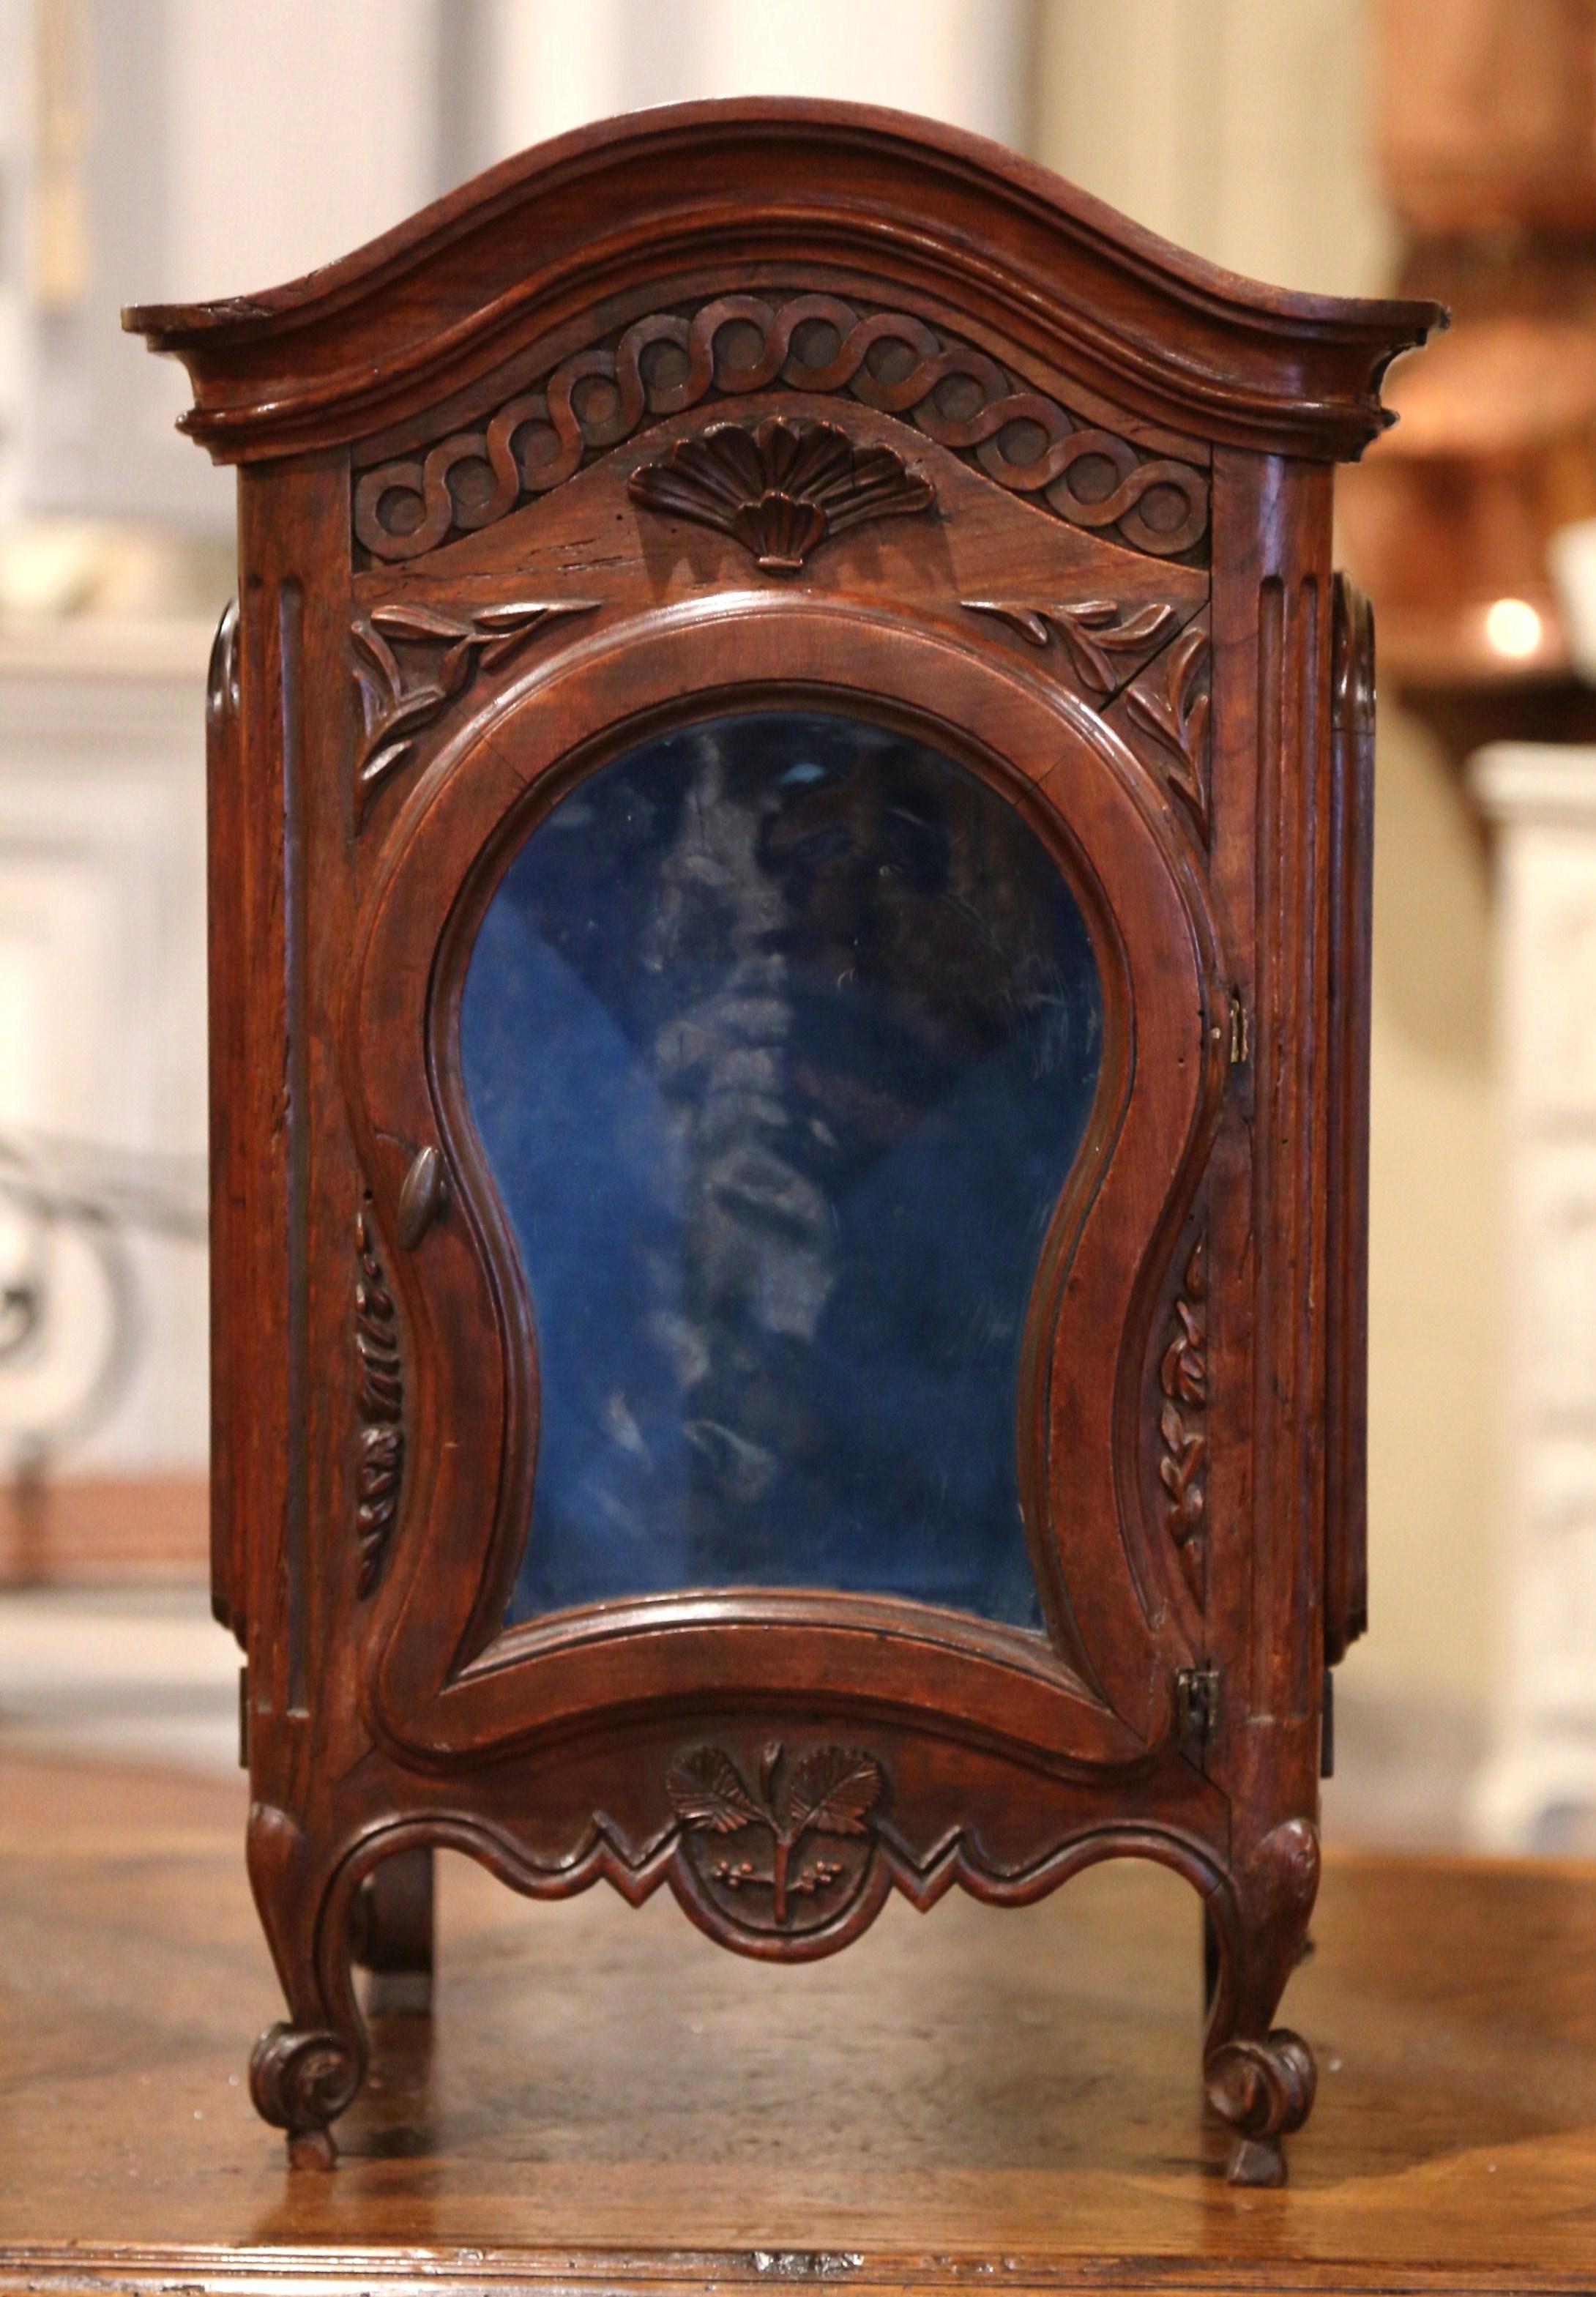 This elegant and petite antique vitrine was crafted in France, circa 1780, the hanging cabinet with bonnet top and shell motif, stands on four escargot feet over a scalloped apron decorated with hand carved flowers and leaves. The wall cabinet